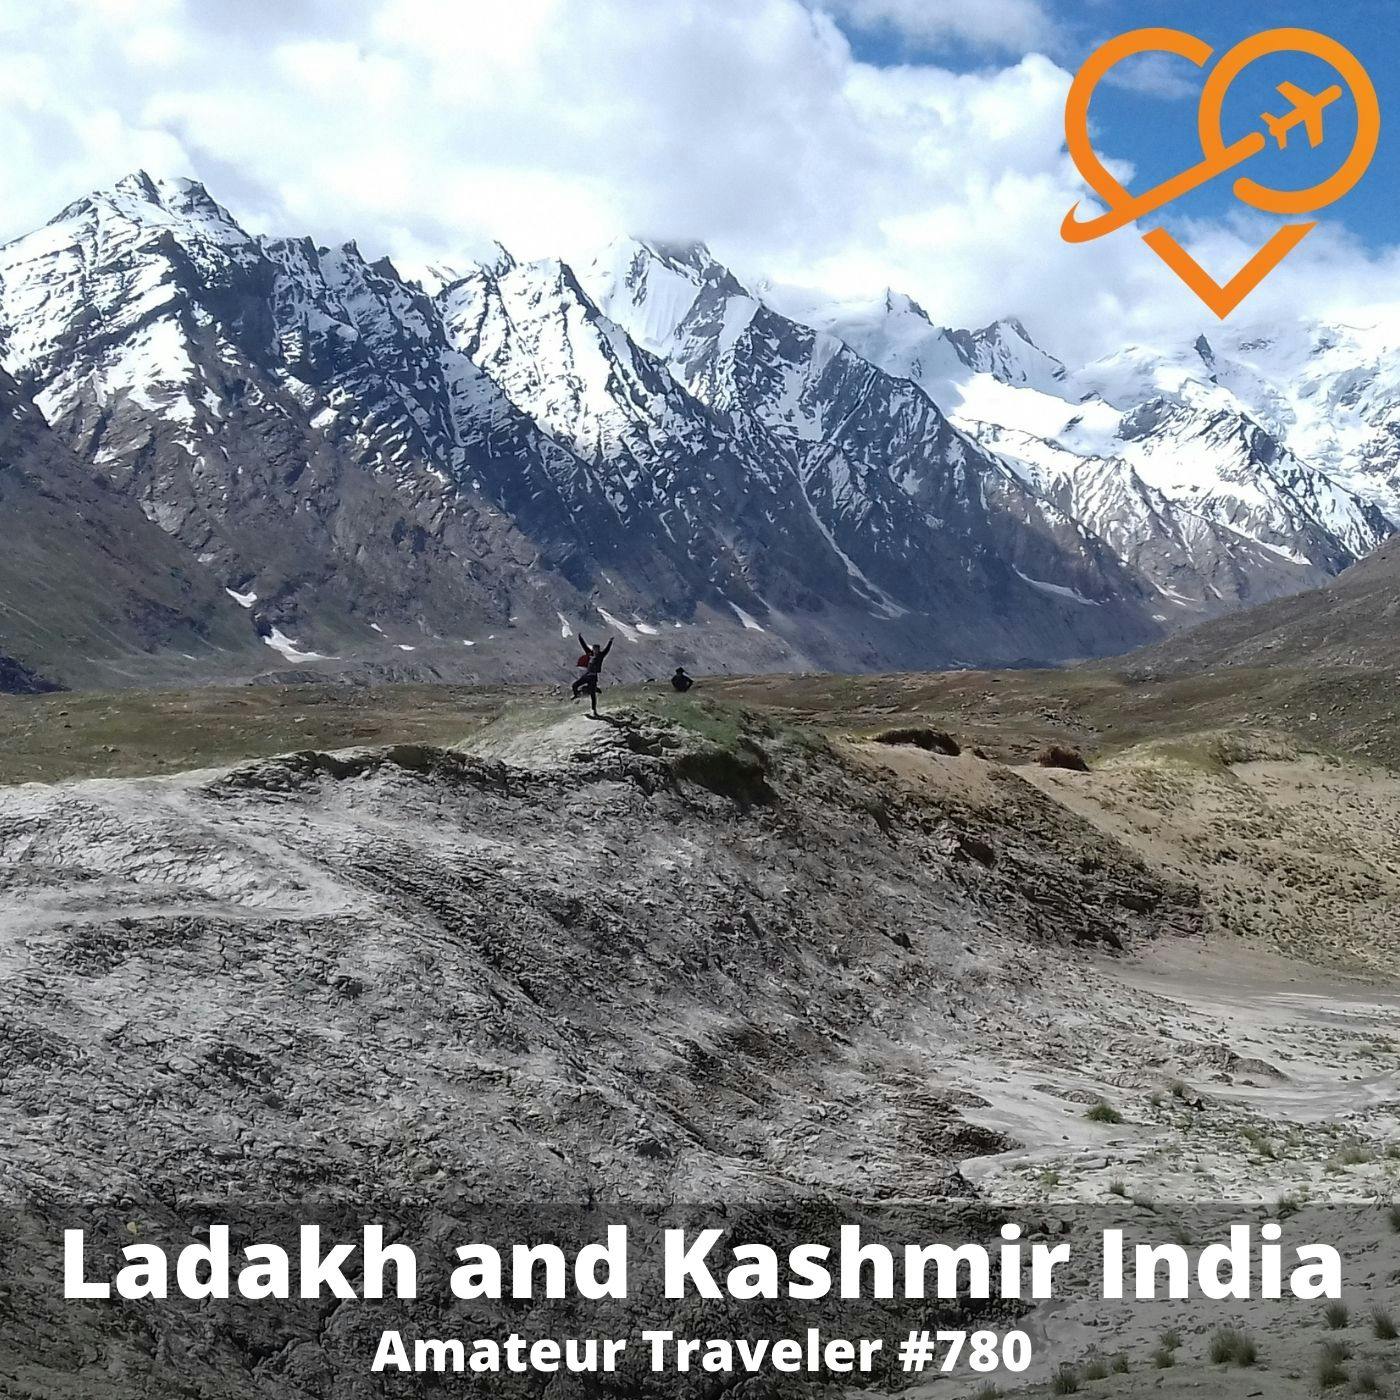 AT#780 - Travel to Ladakh and Kashmir India